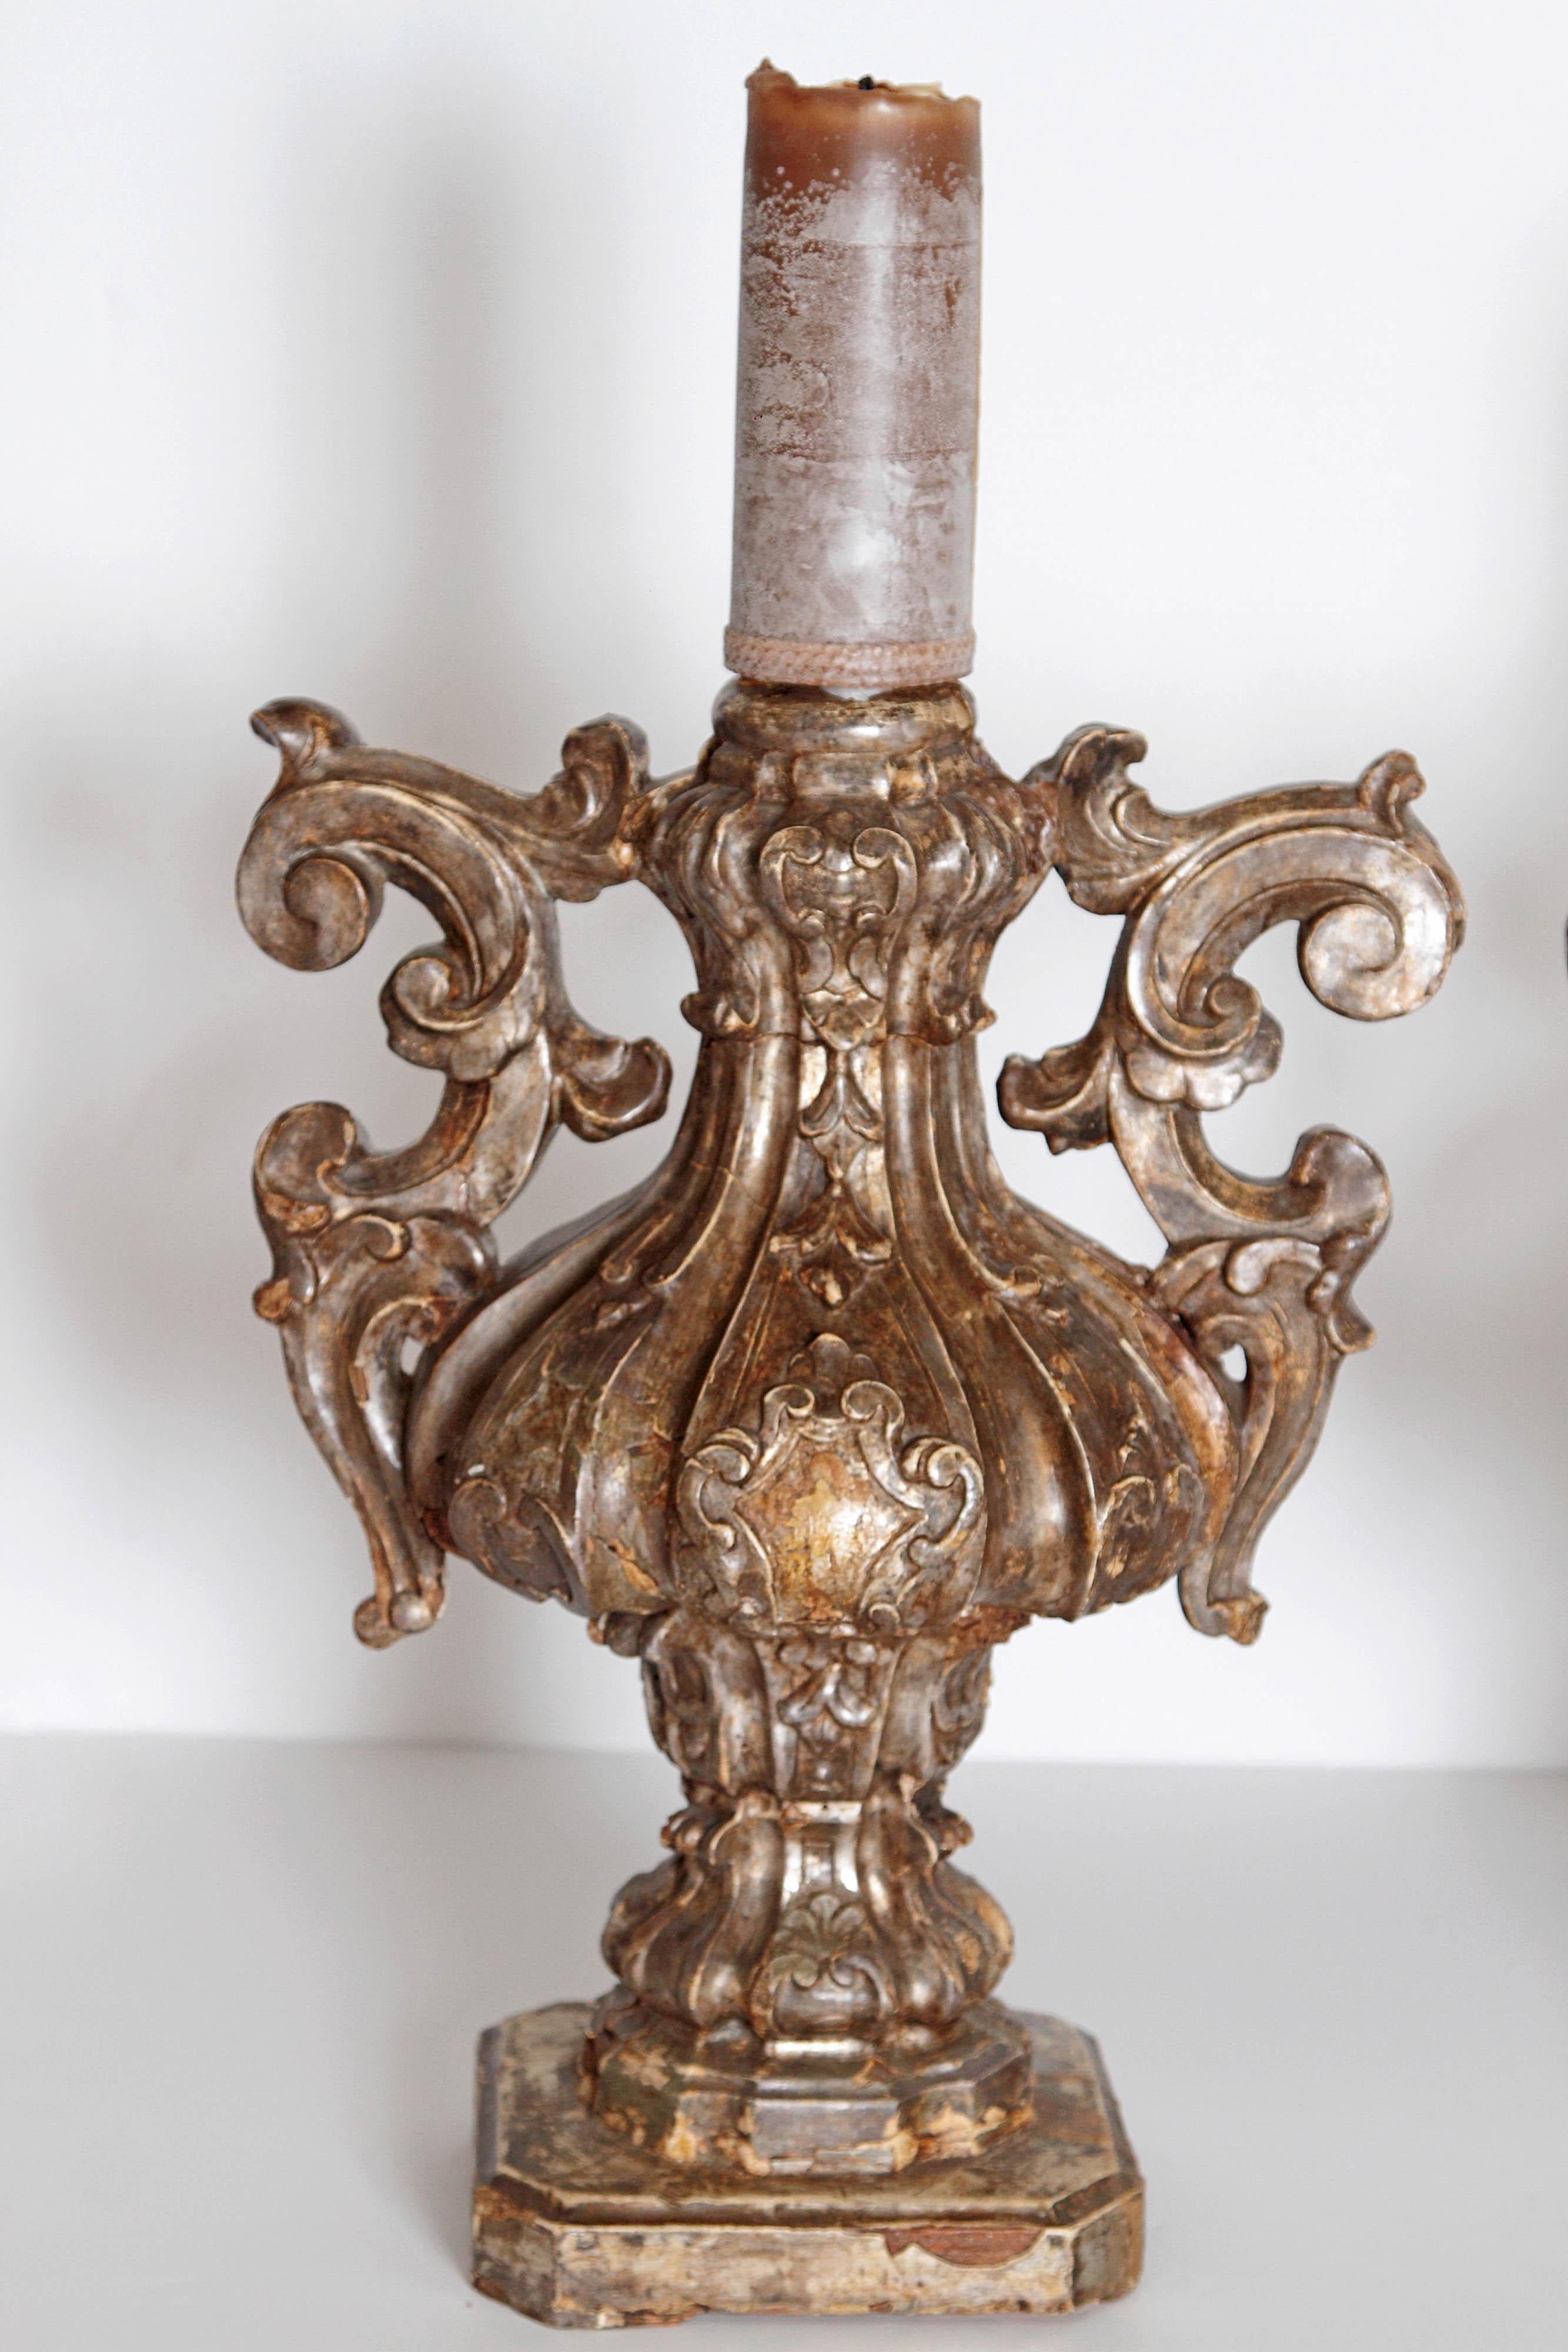 An impressive pair of late 18th century, Italian candleholders. Heavily carved giltwood with scrolls and melon shaped bodies on square bases.